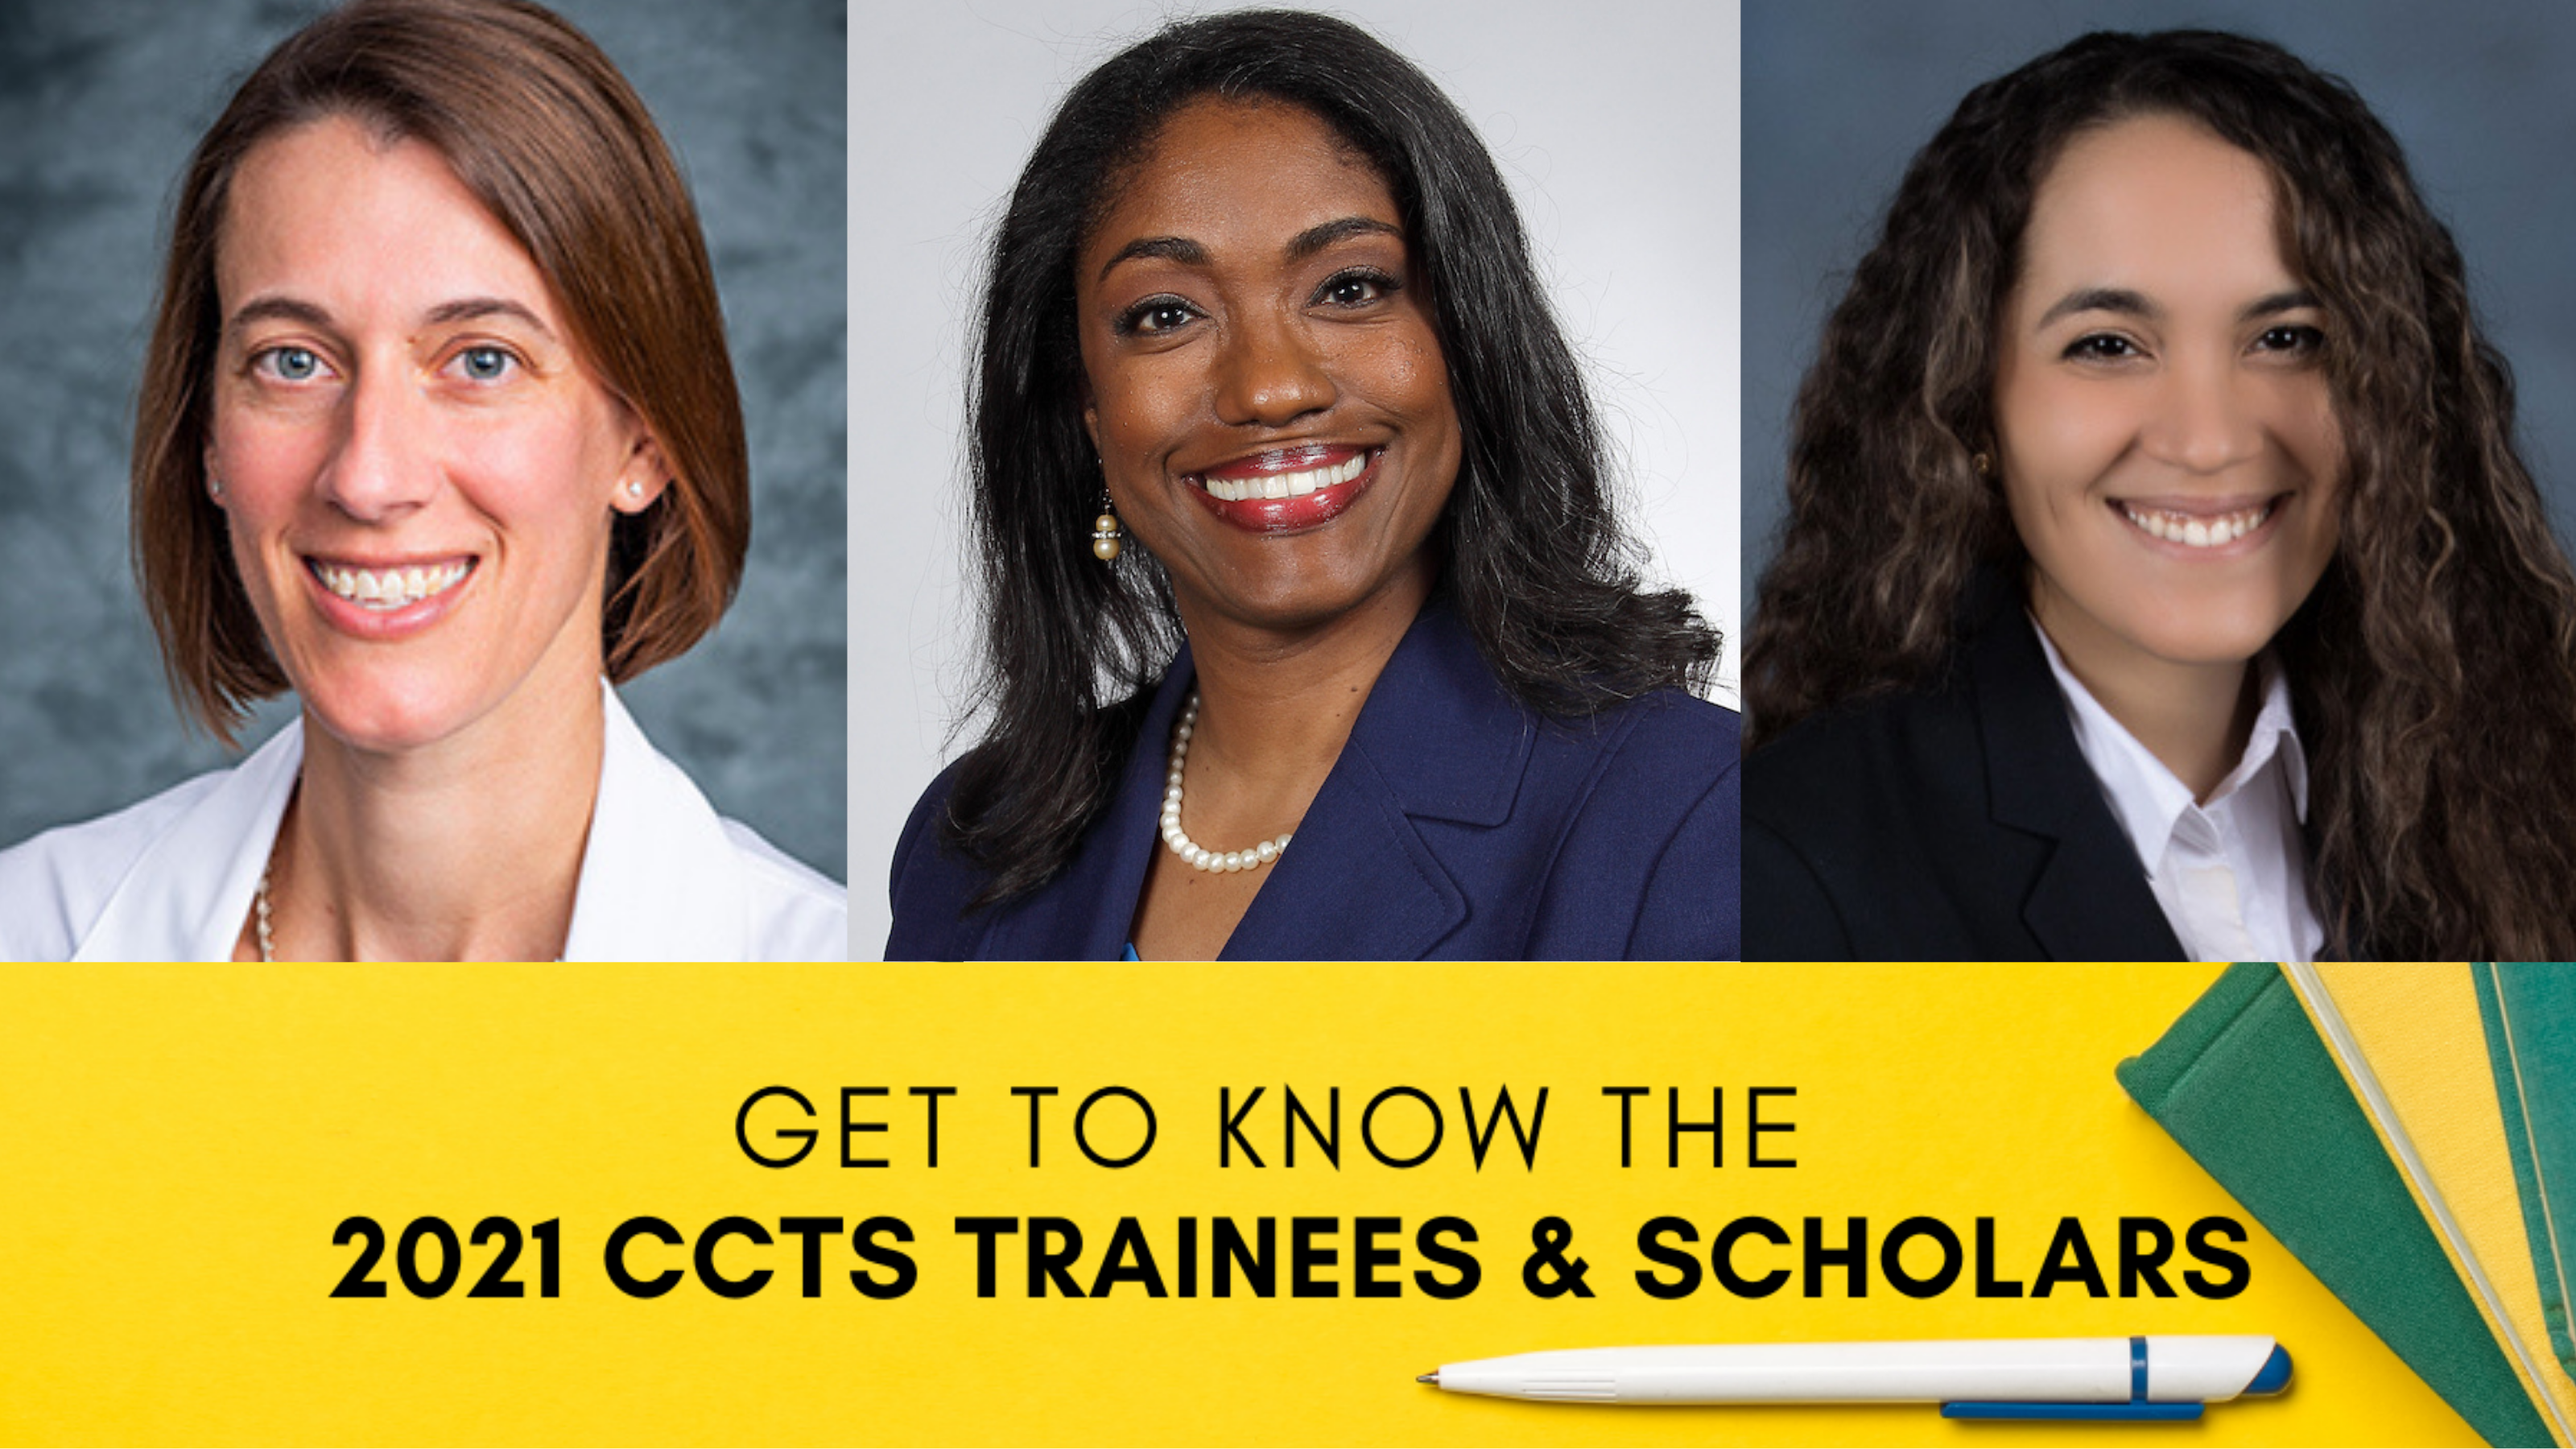 Get to Know the 2021 CCTS Trainees and Scholars